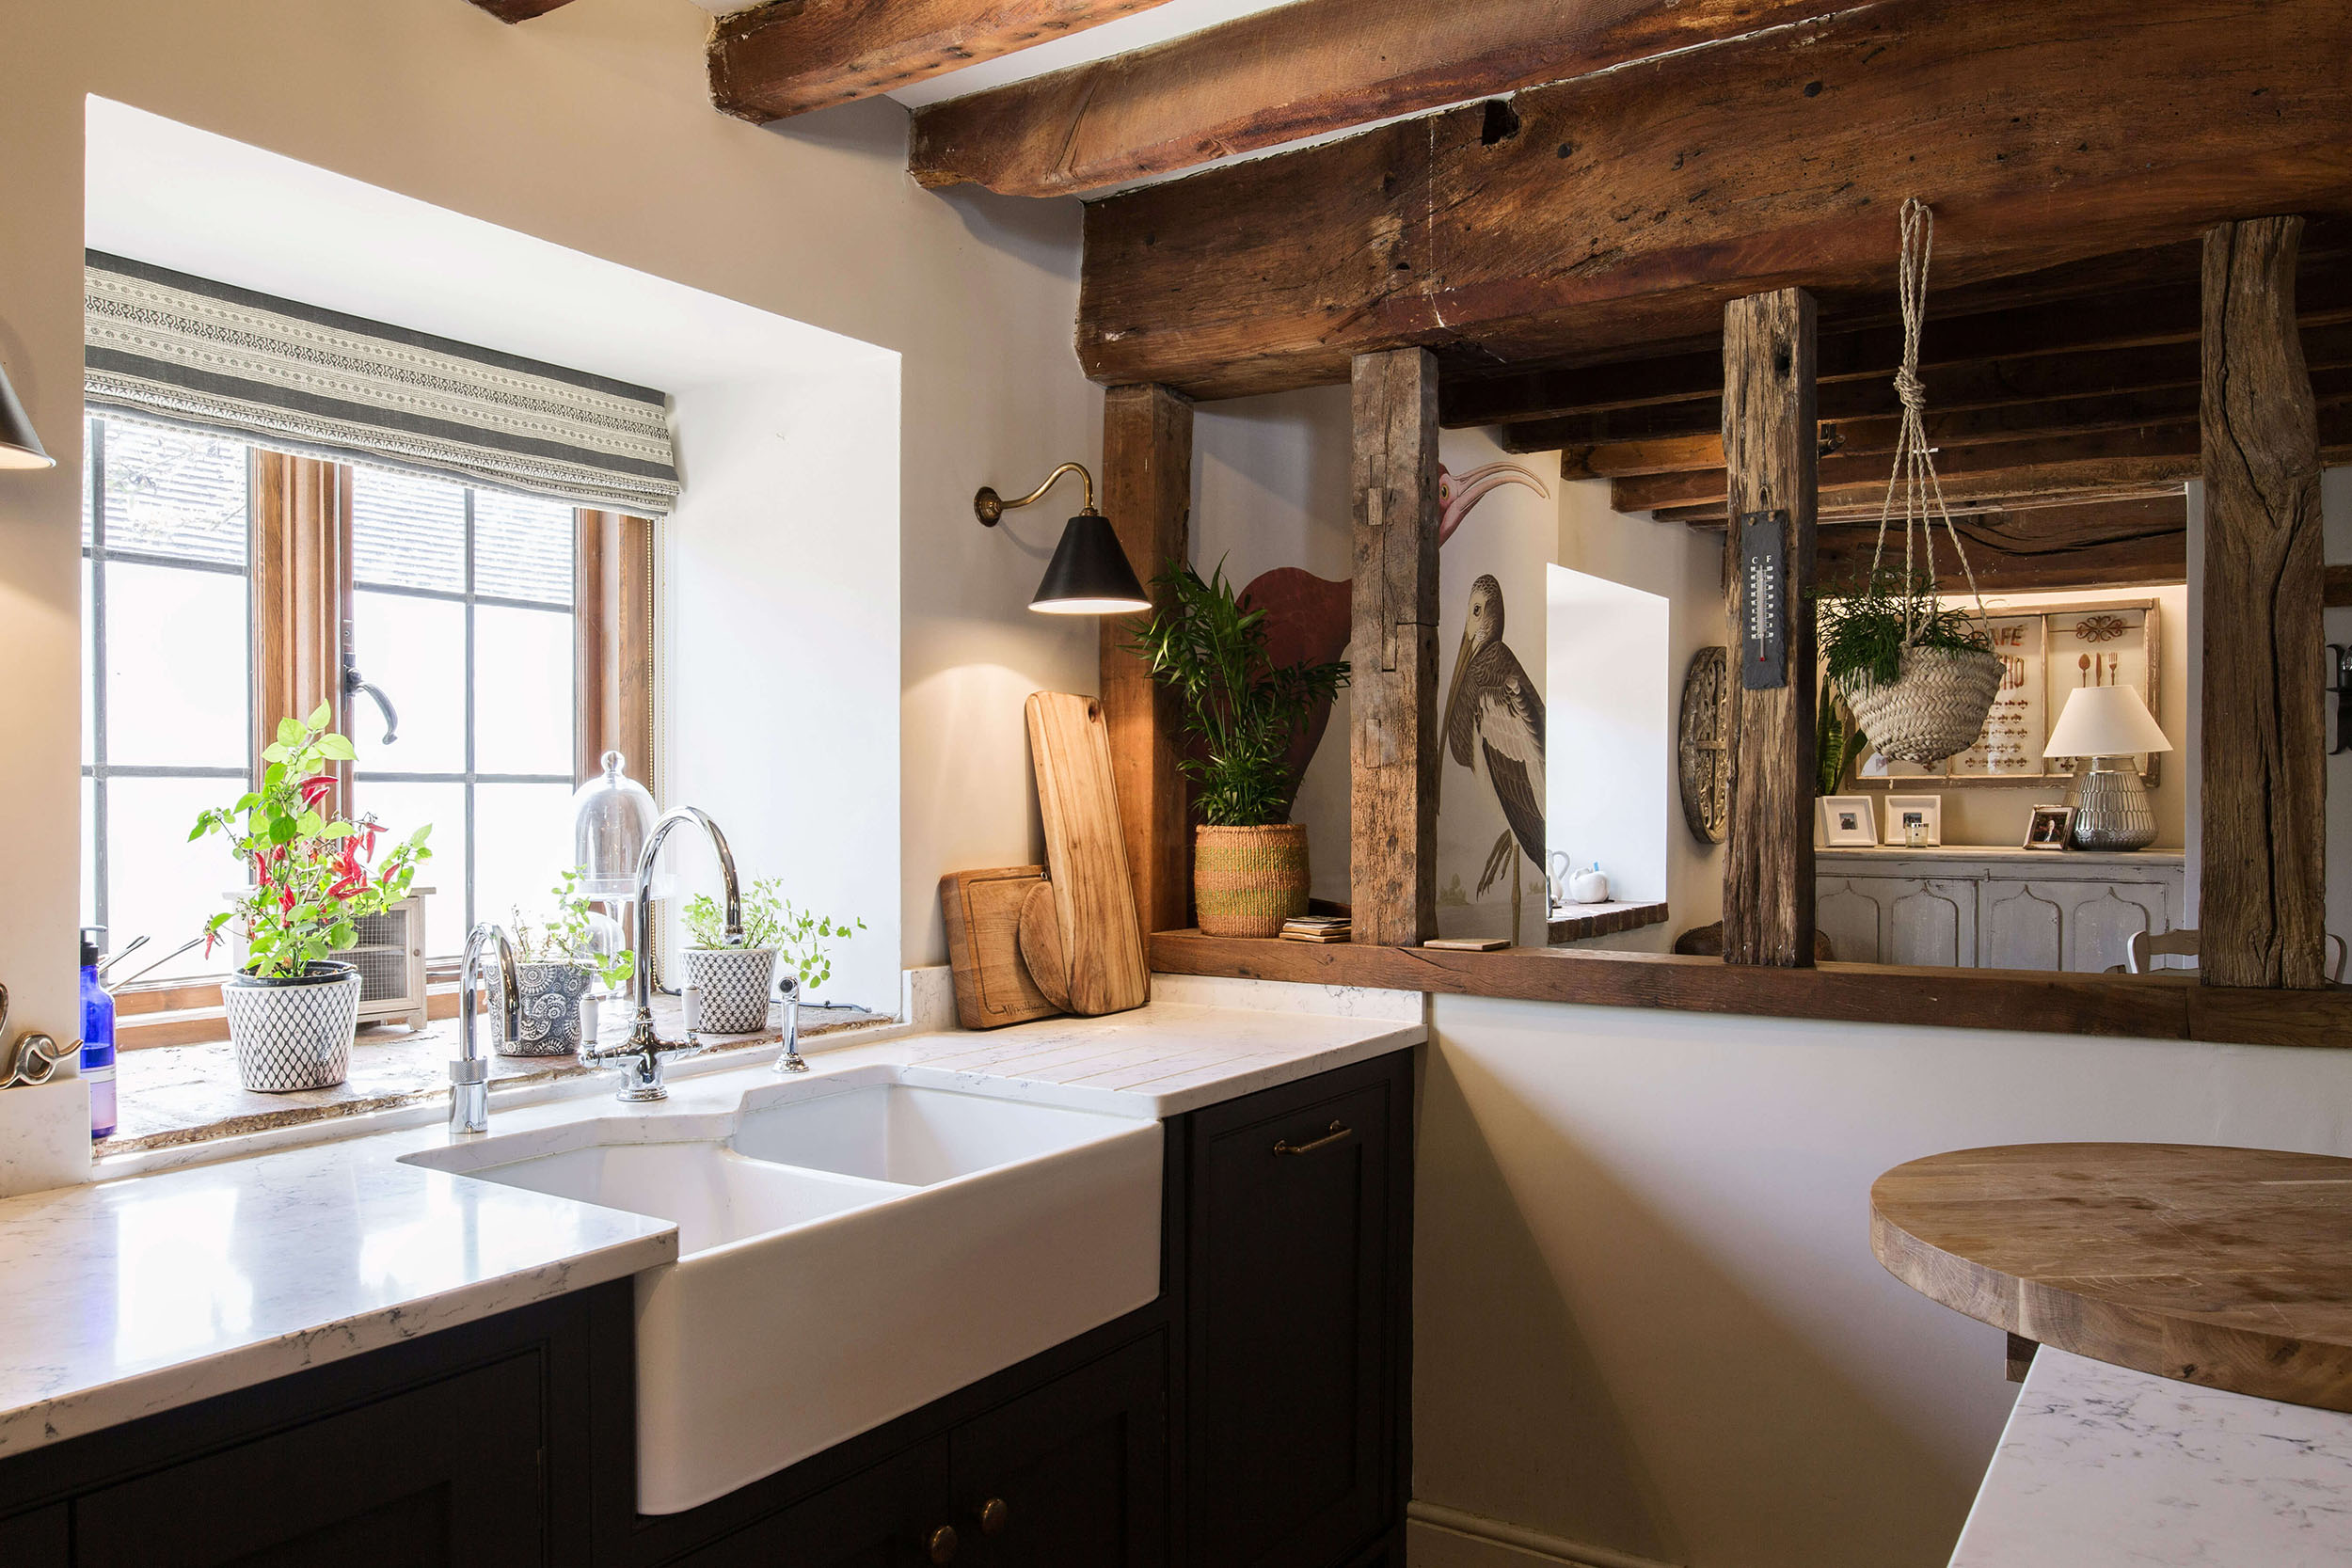 Trend : Urban Rustic Kitchens - The Design Sheppard